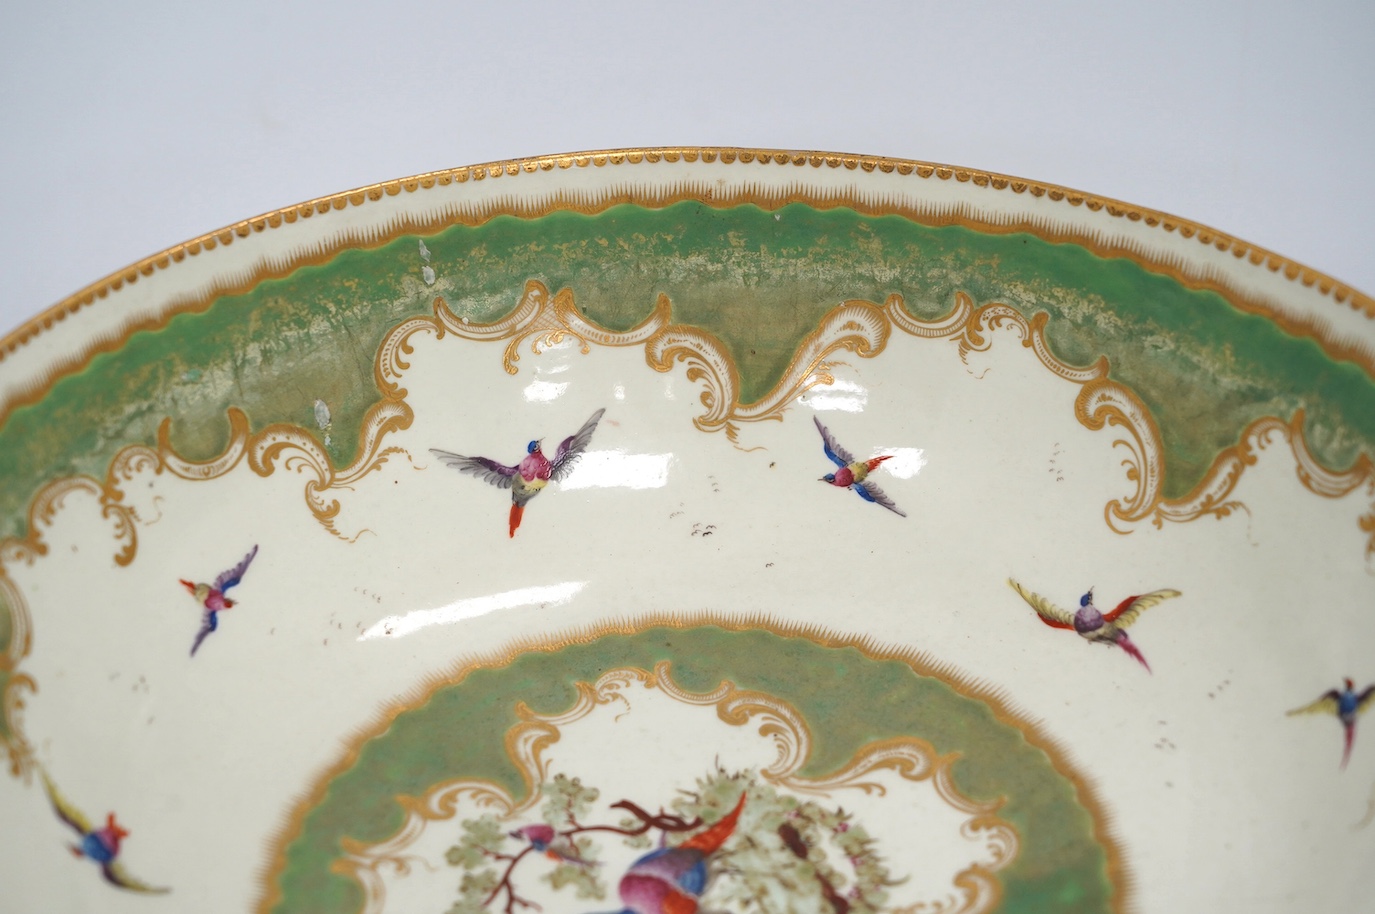 A large Worcester 'Fantastic Birds' bowl, c.1780, 28cm diameter. Condition - good, would benefit from a clean